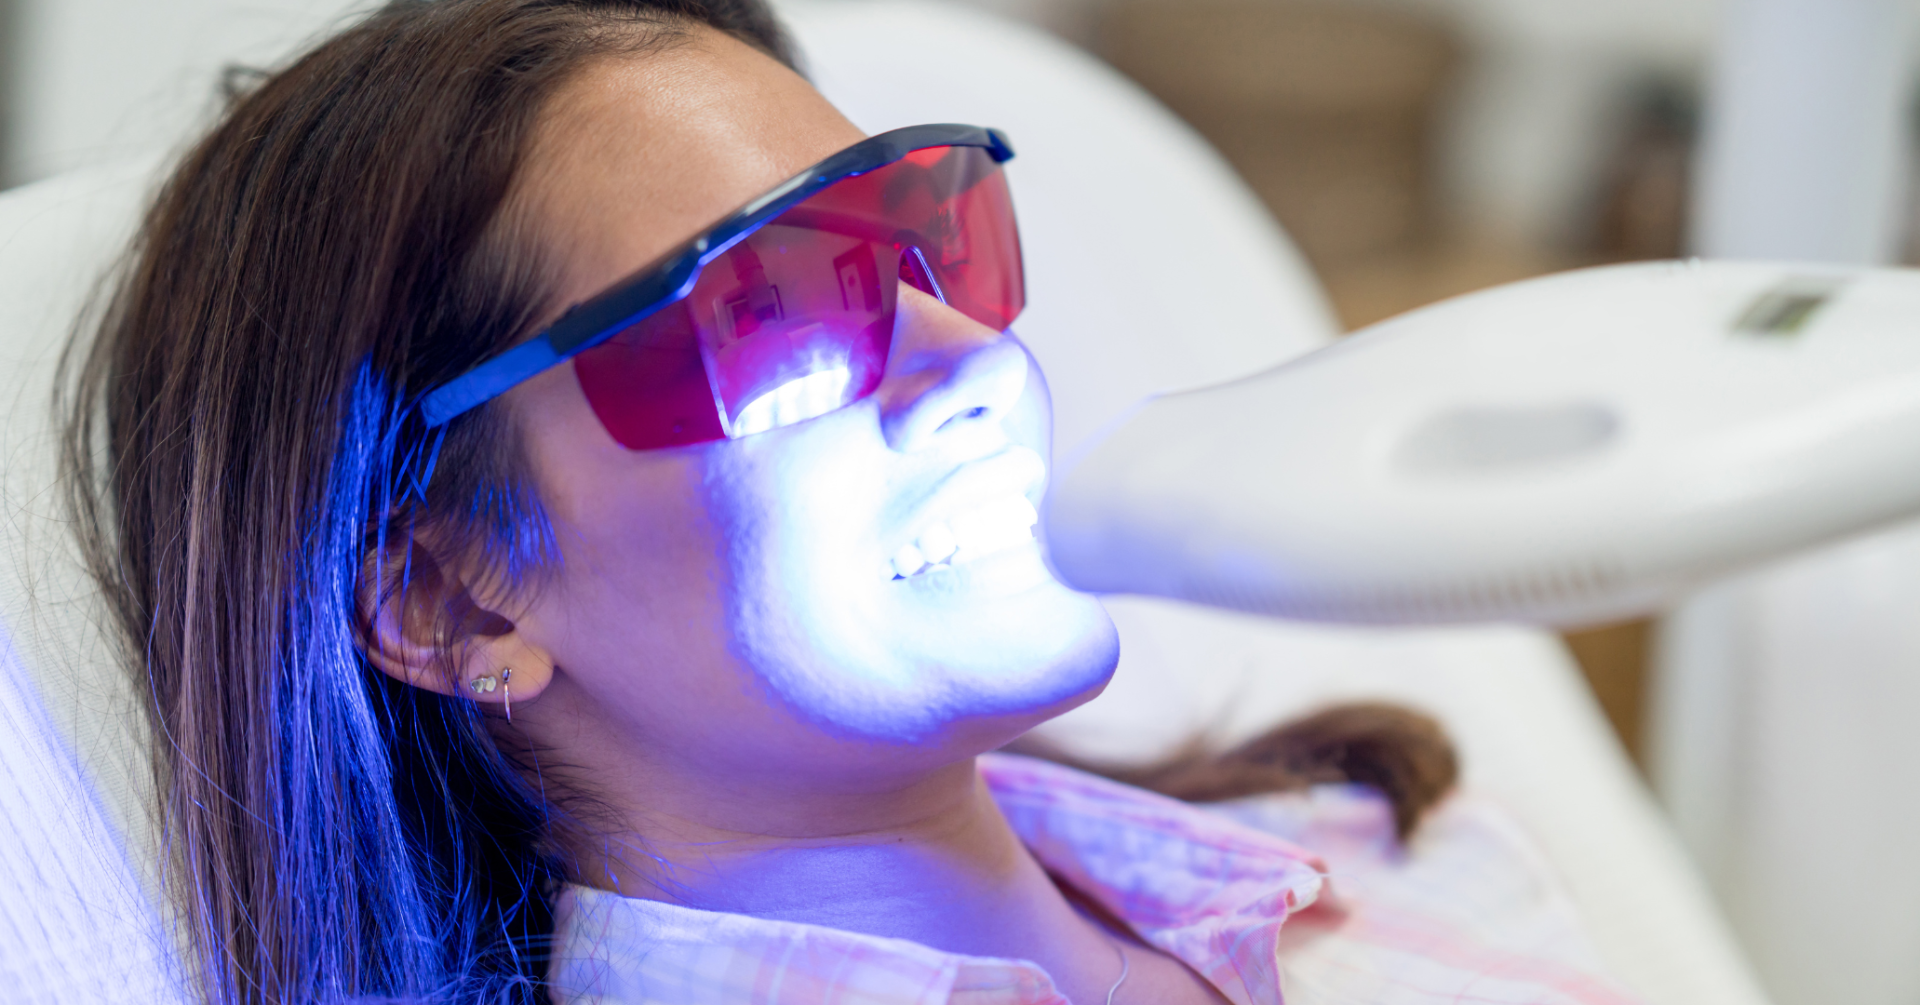 A woman is getting a teeth whitening treatment at a dental office.